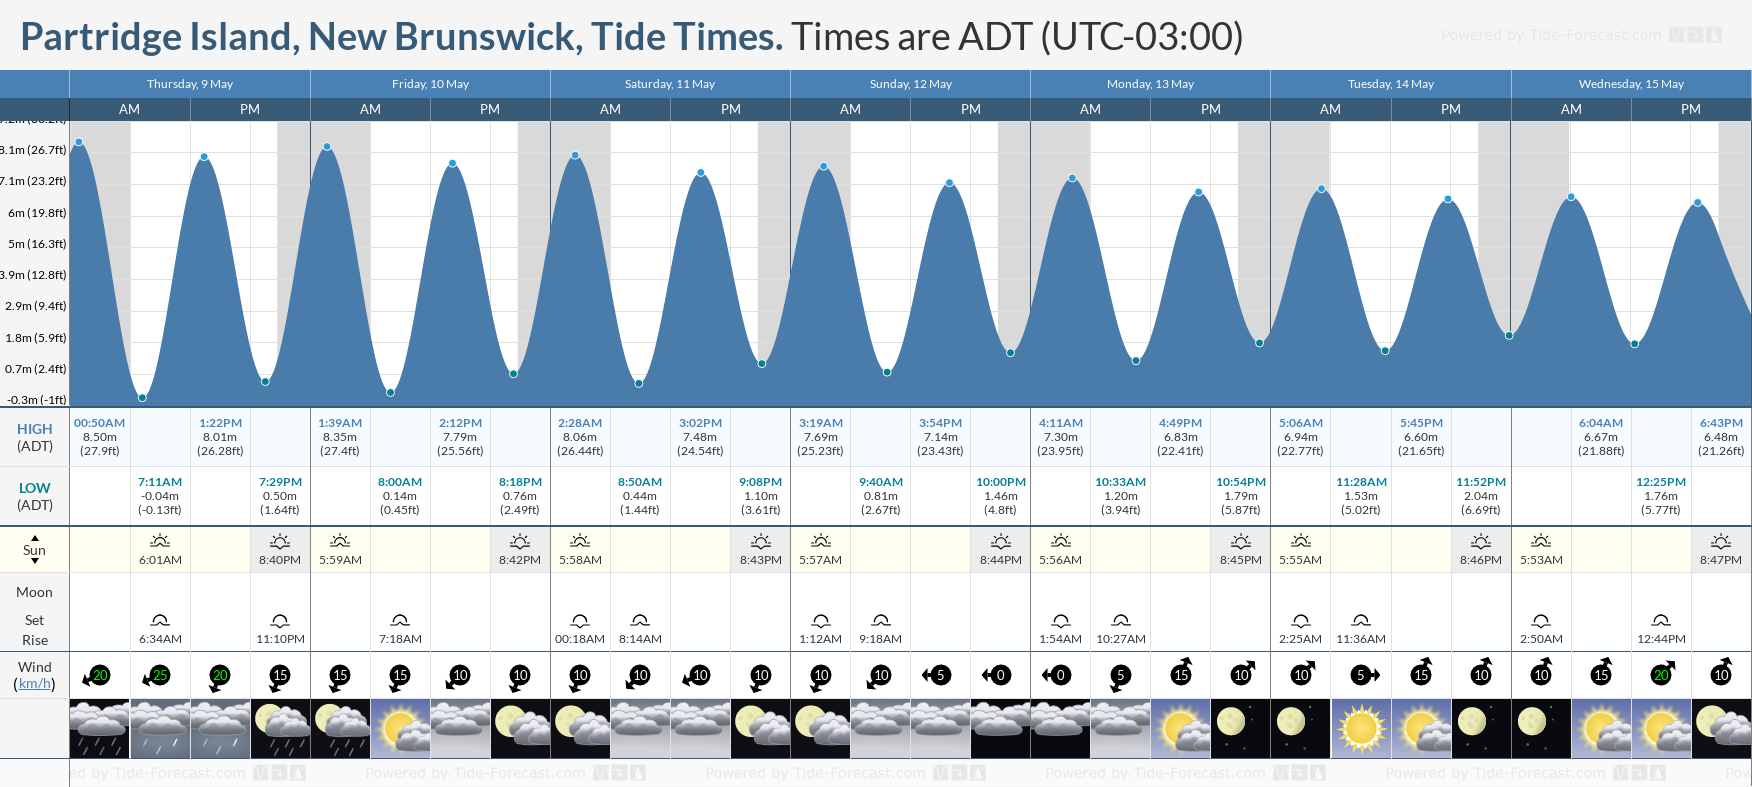 Partridge Island, New Brunswick Tide Chart including high and low tide tide times for the next 7 days